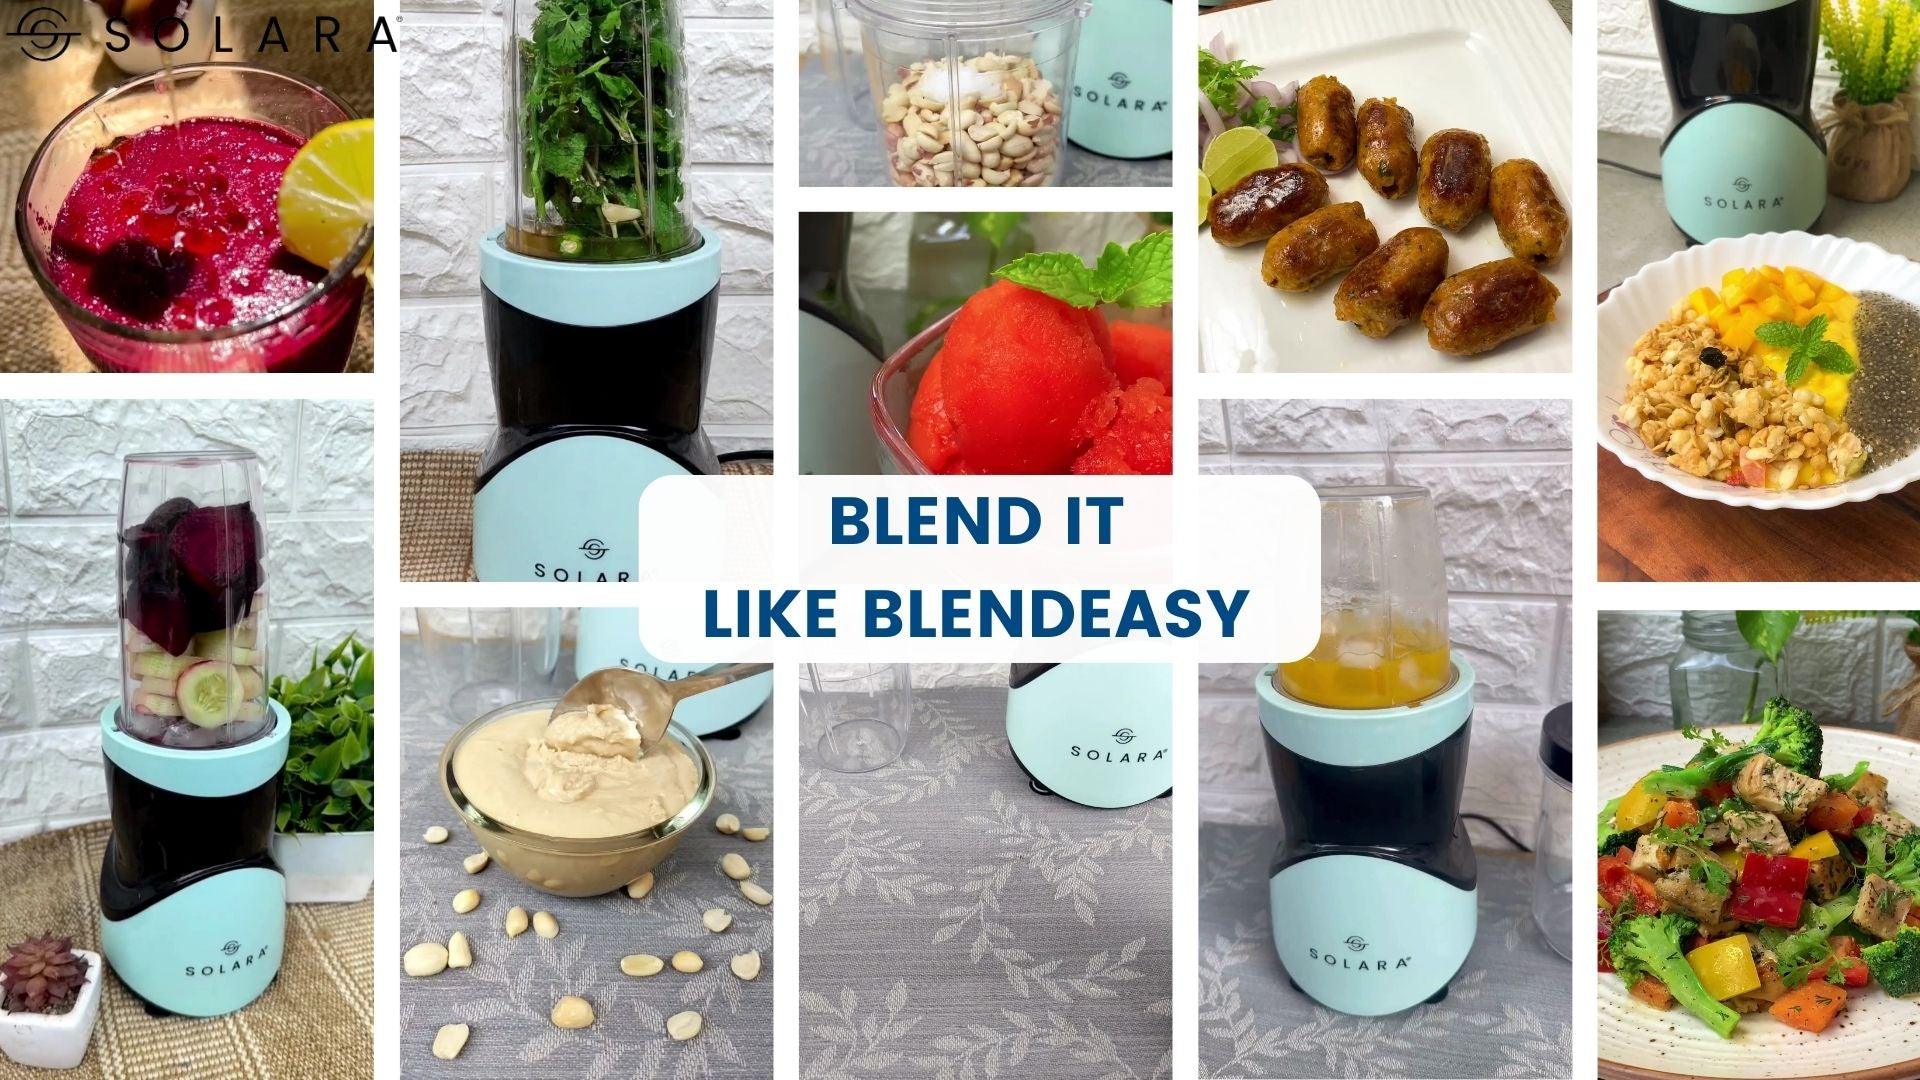 10 Delicious and Healthy Smoothie Recipes for Your Solara BlendEasy Blender - Solara Home